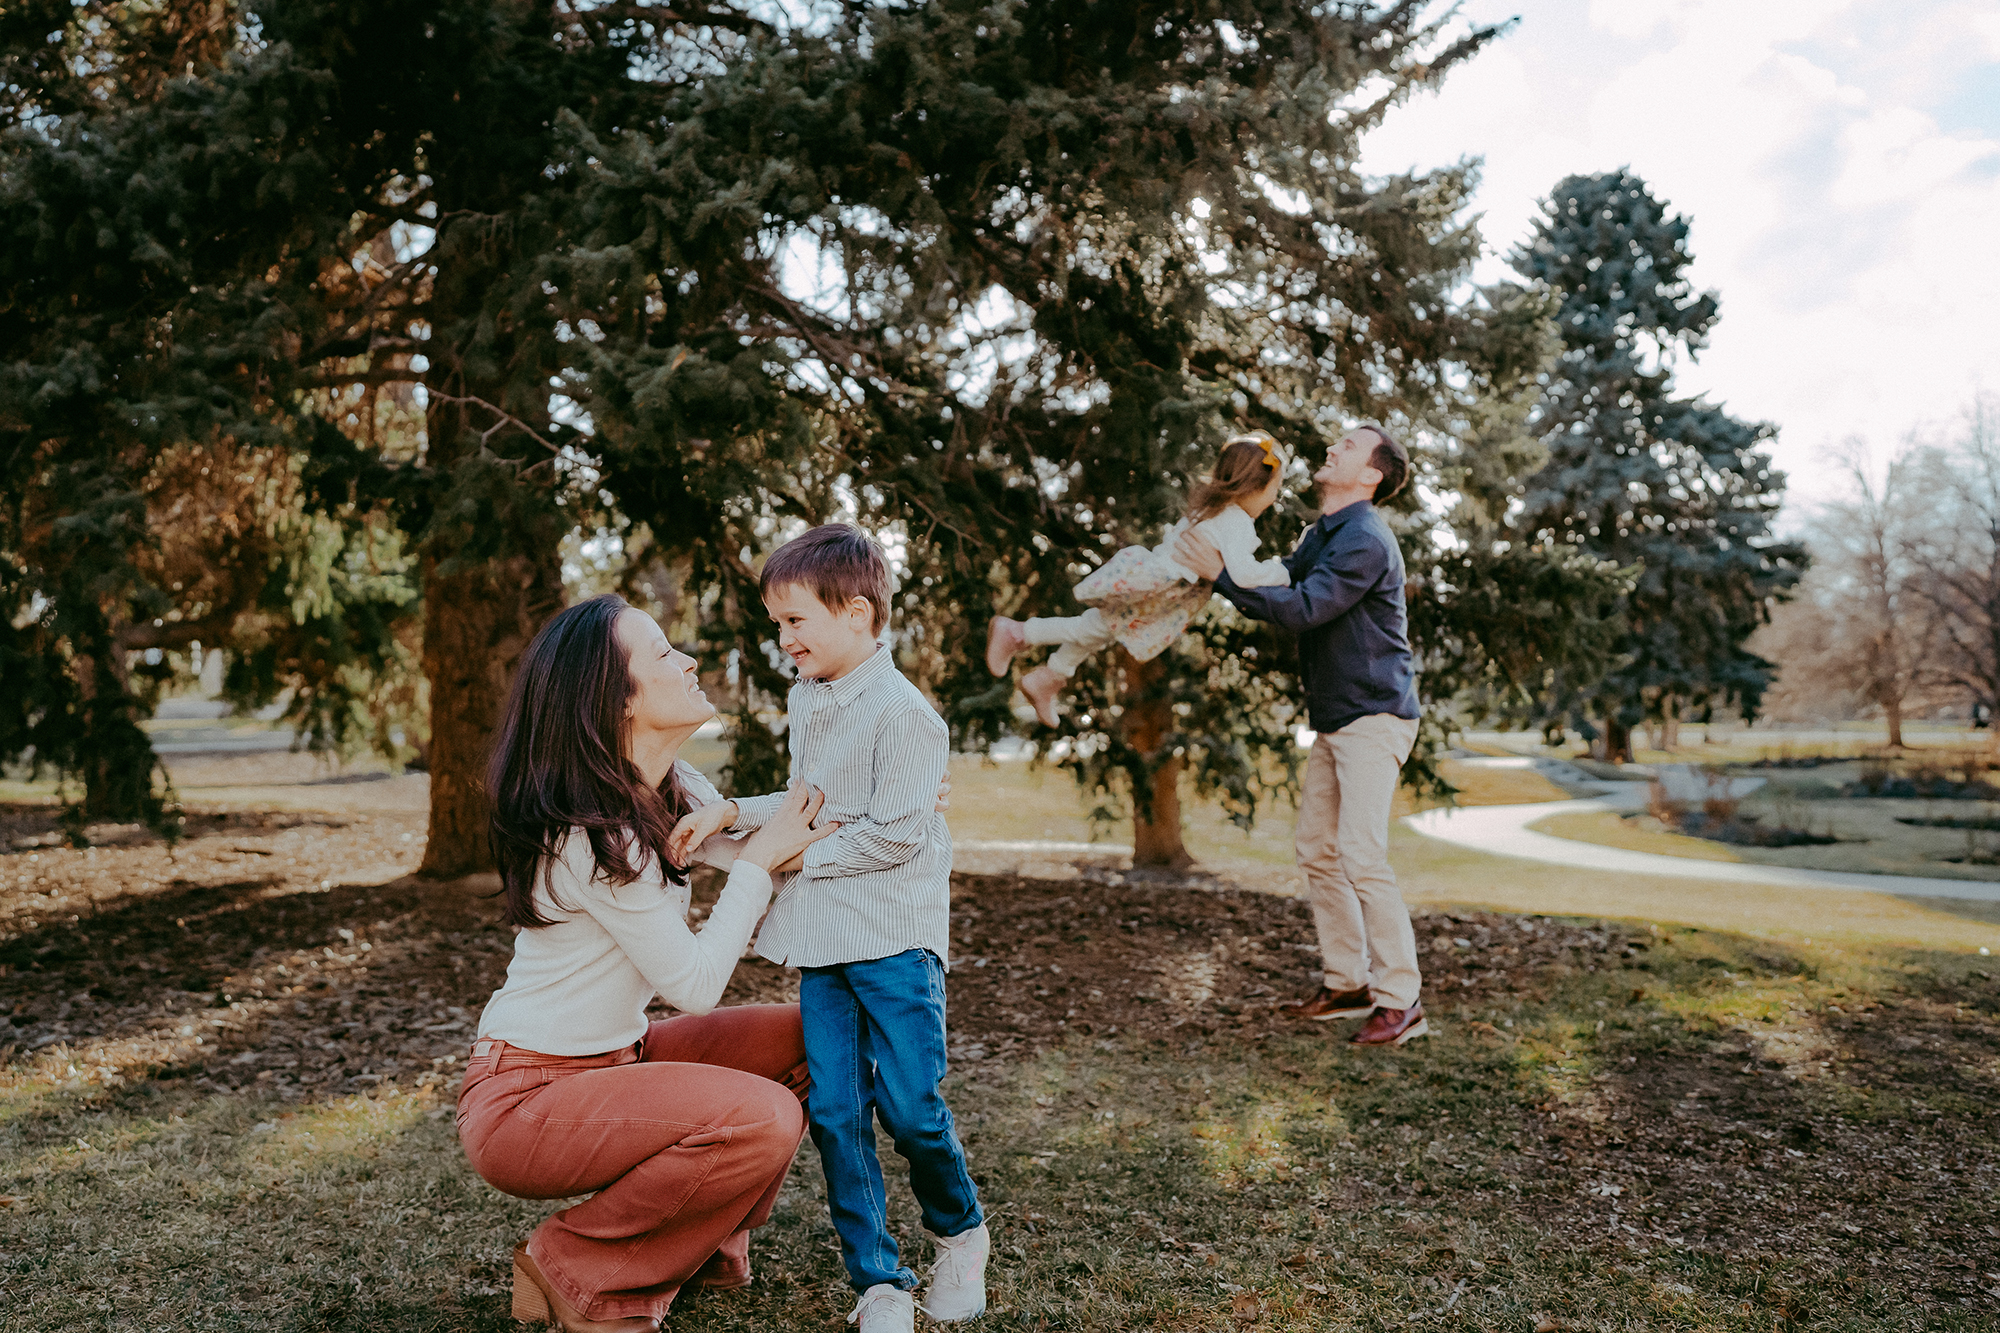 Denver family photographer captures mother talking to child while father plays with child